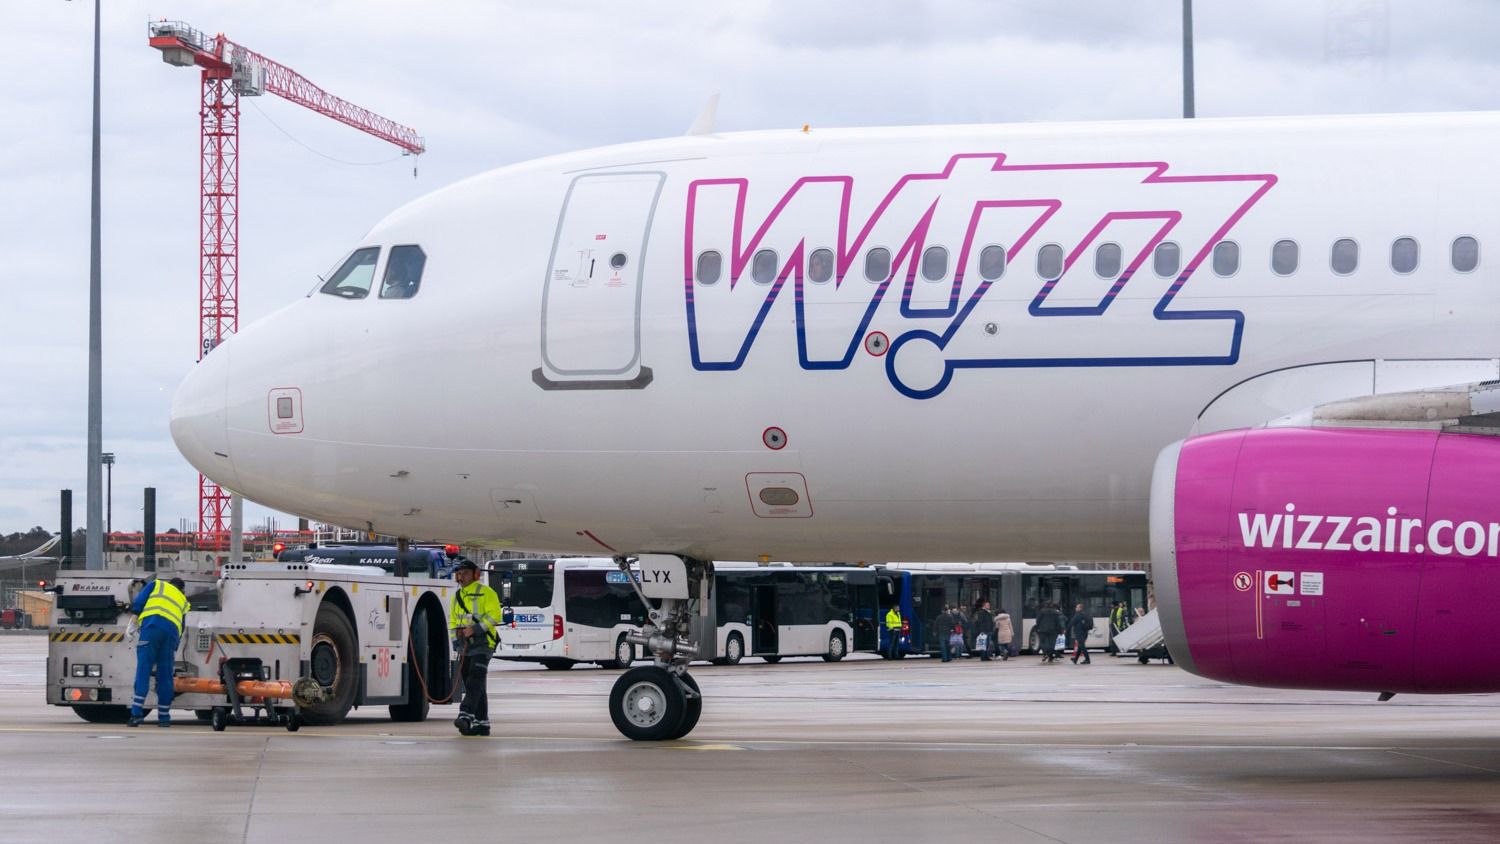 Wizz Air launches flights from London Luton to Salzburg